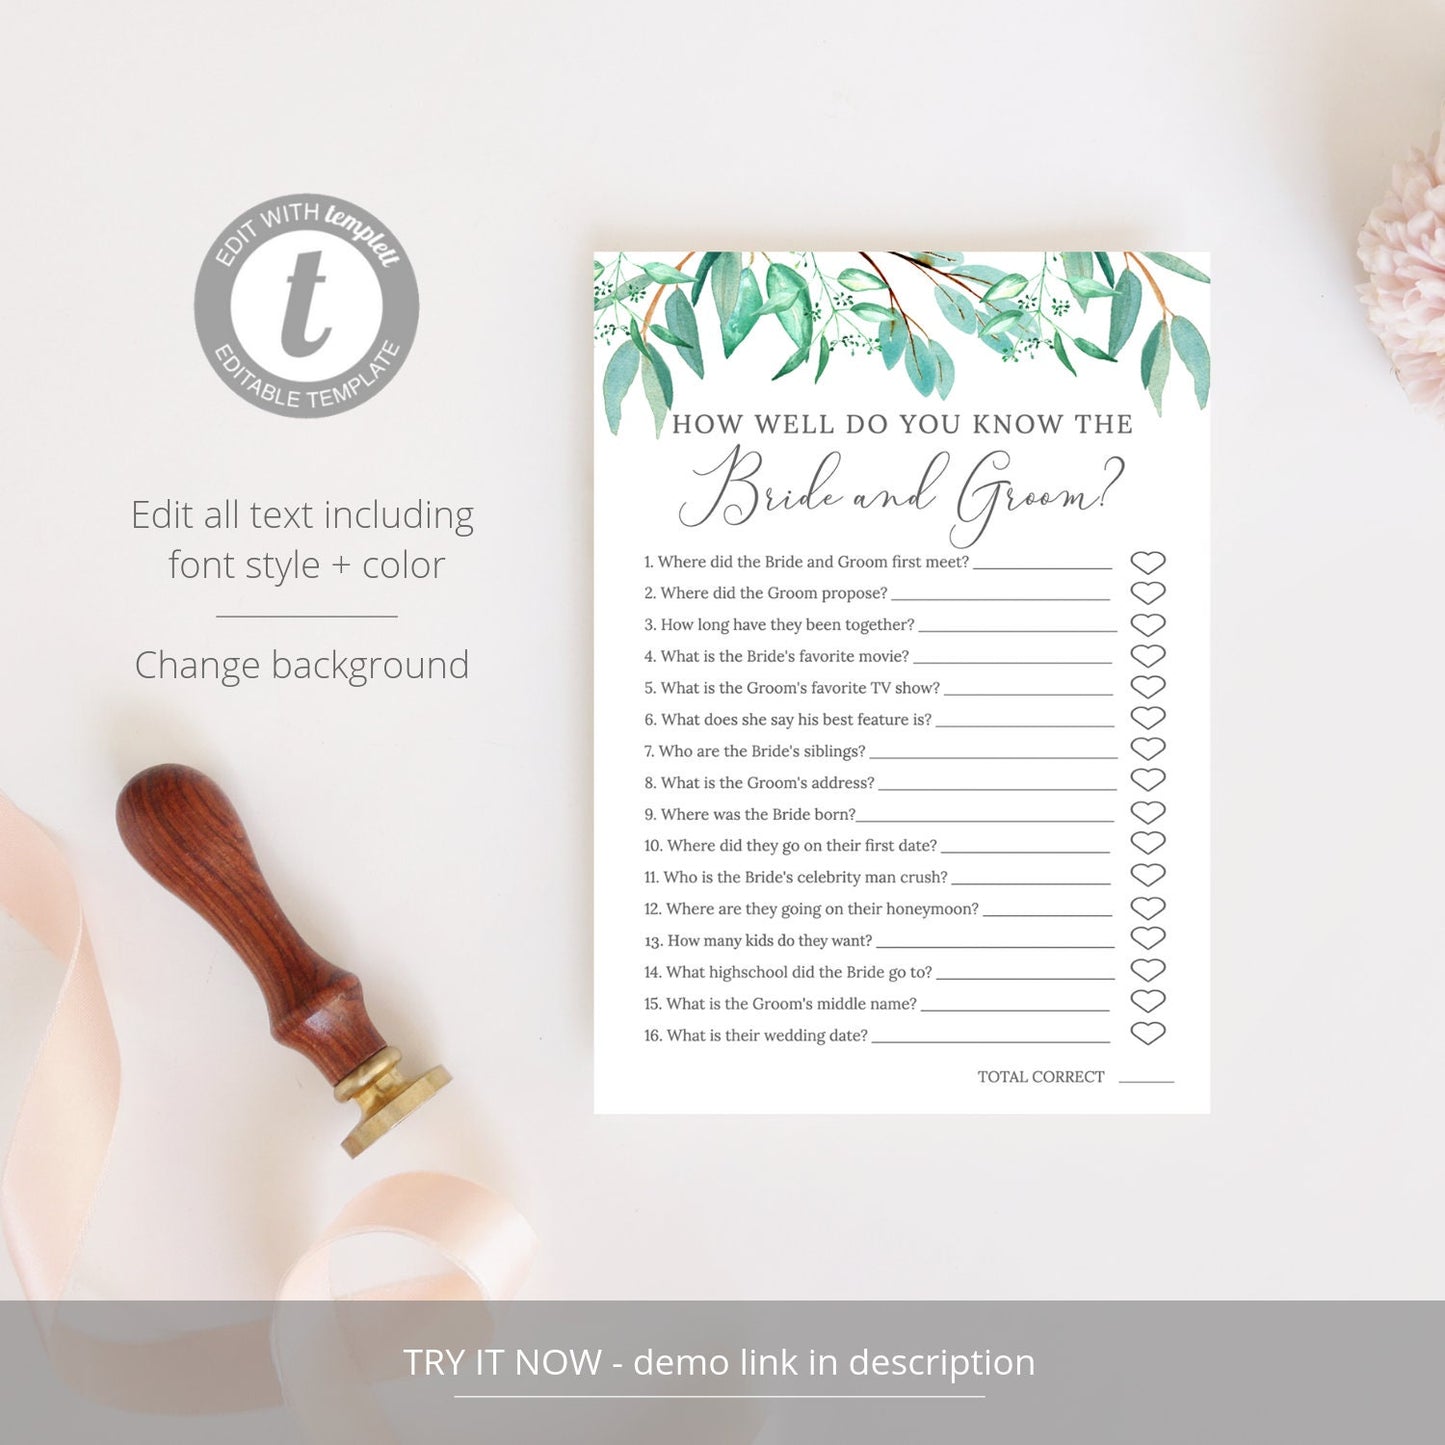 Editable How Well Do You Know the Bride and Groom Bridal Shower Games Wedding Games Greenery Template